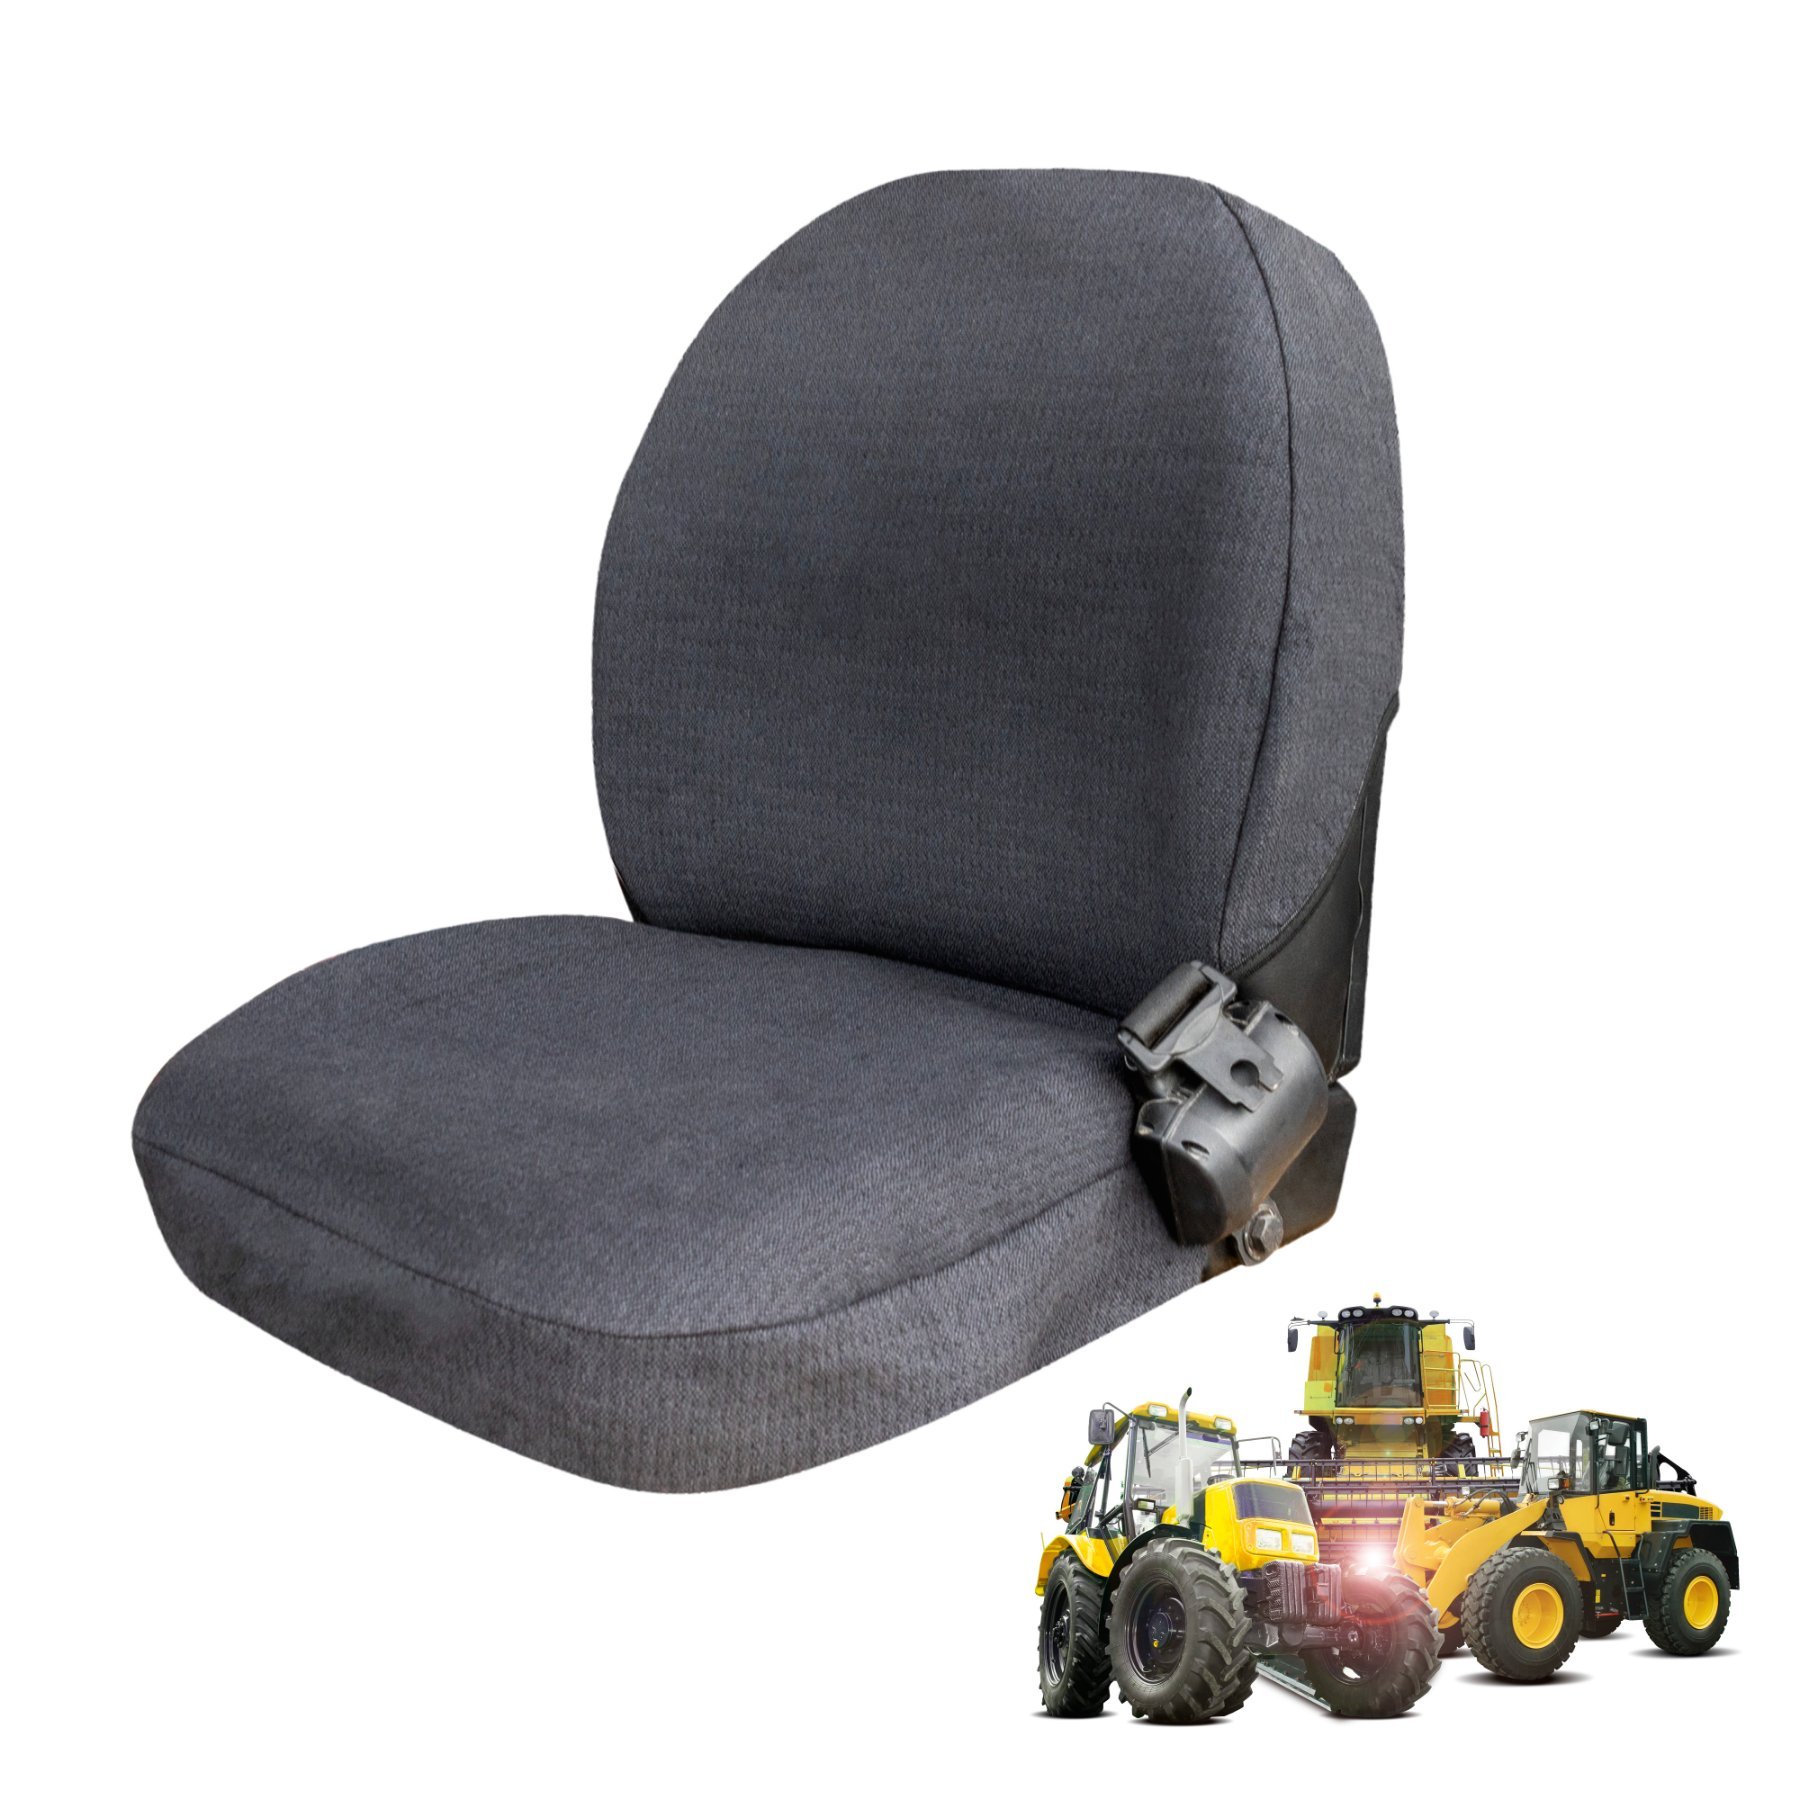 Seat cover small excavators, forklifts, size 6